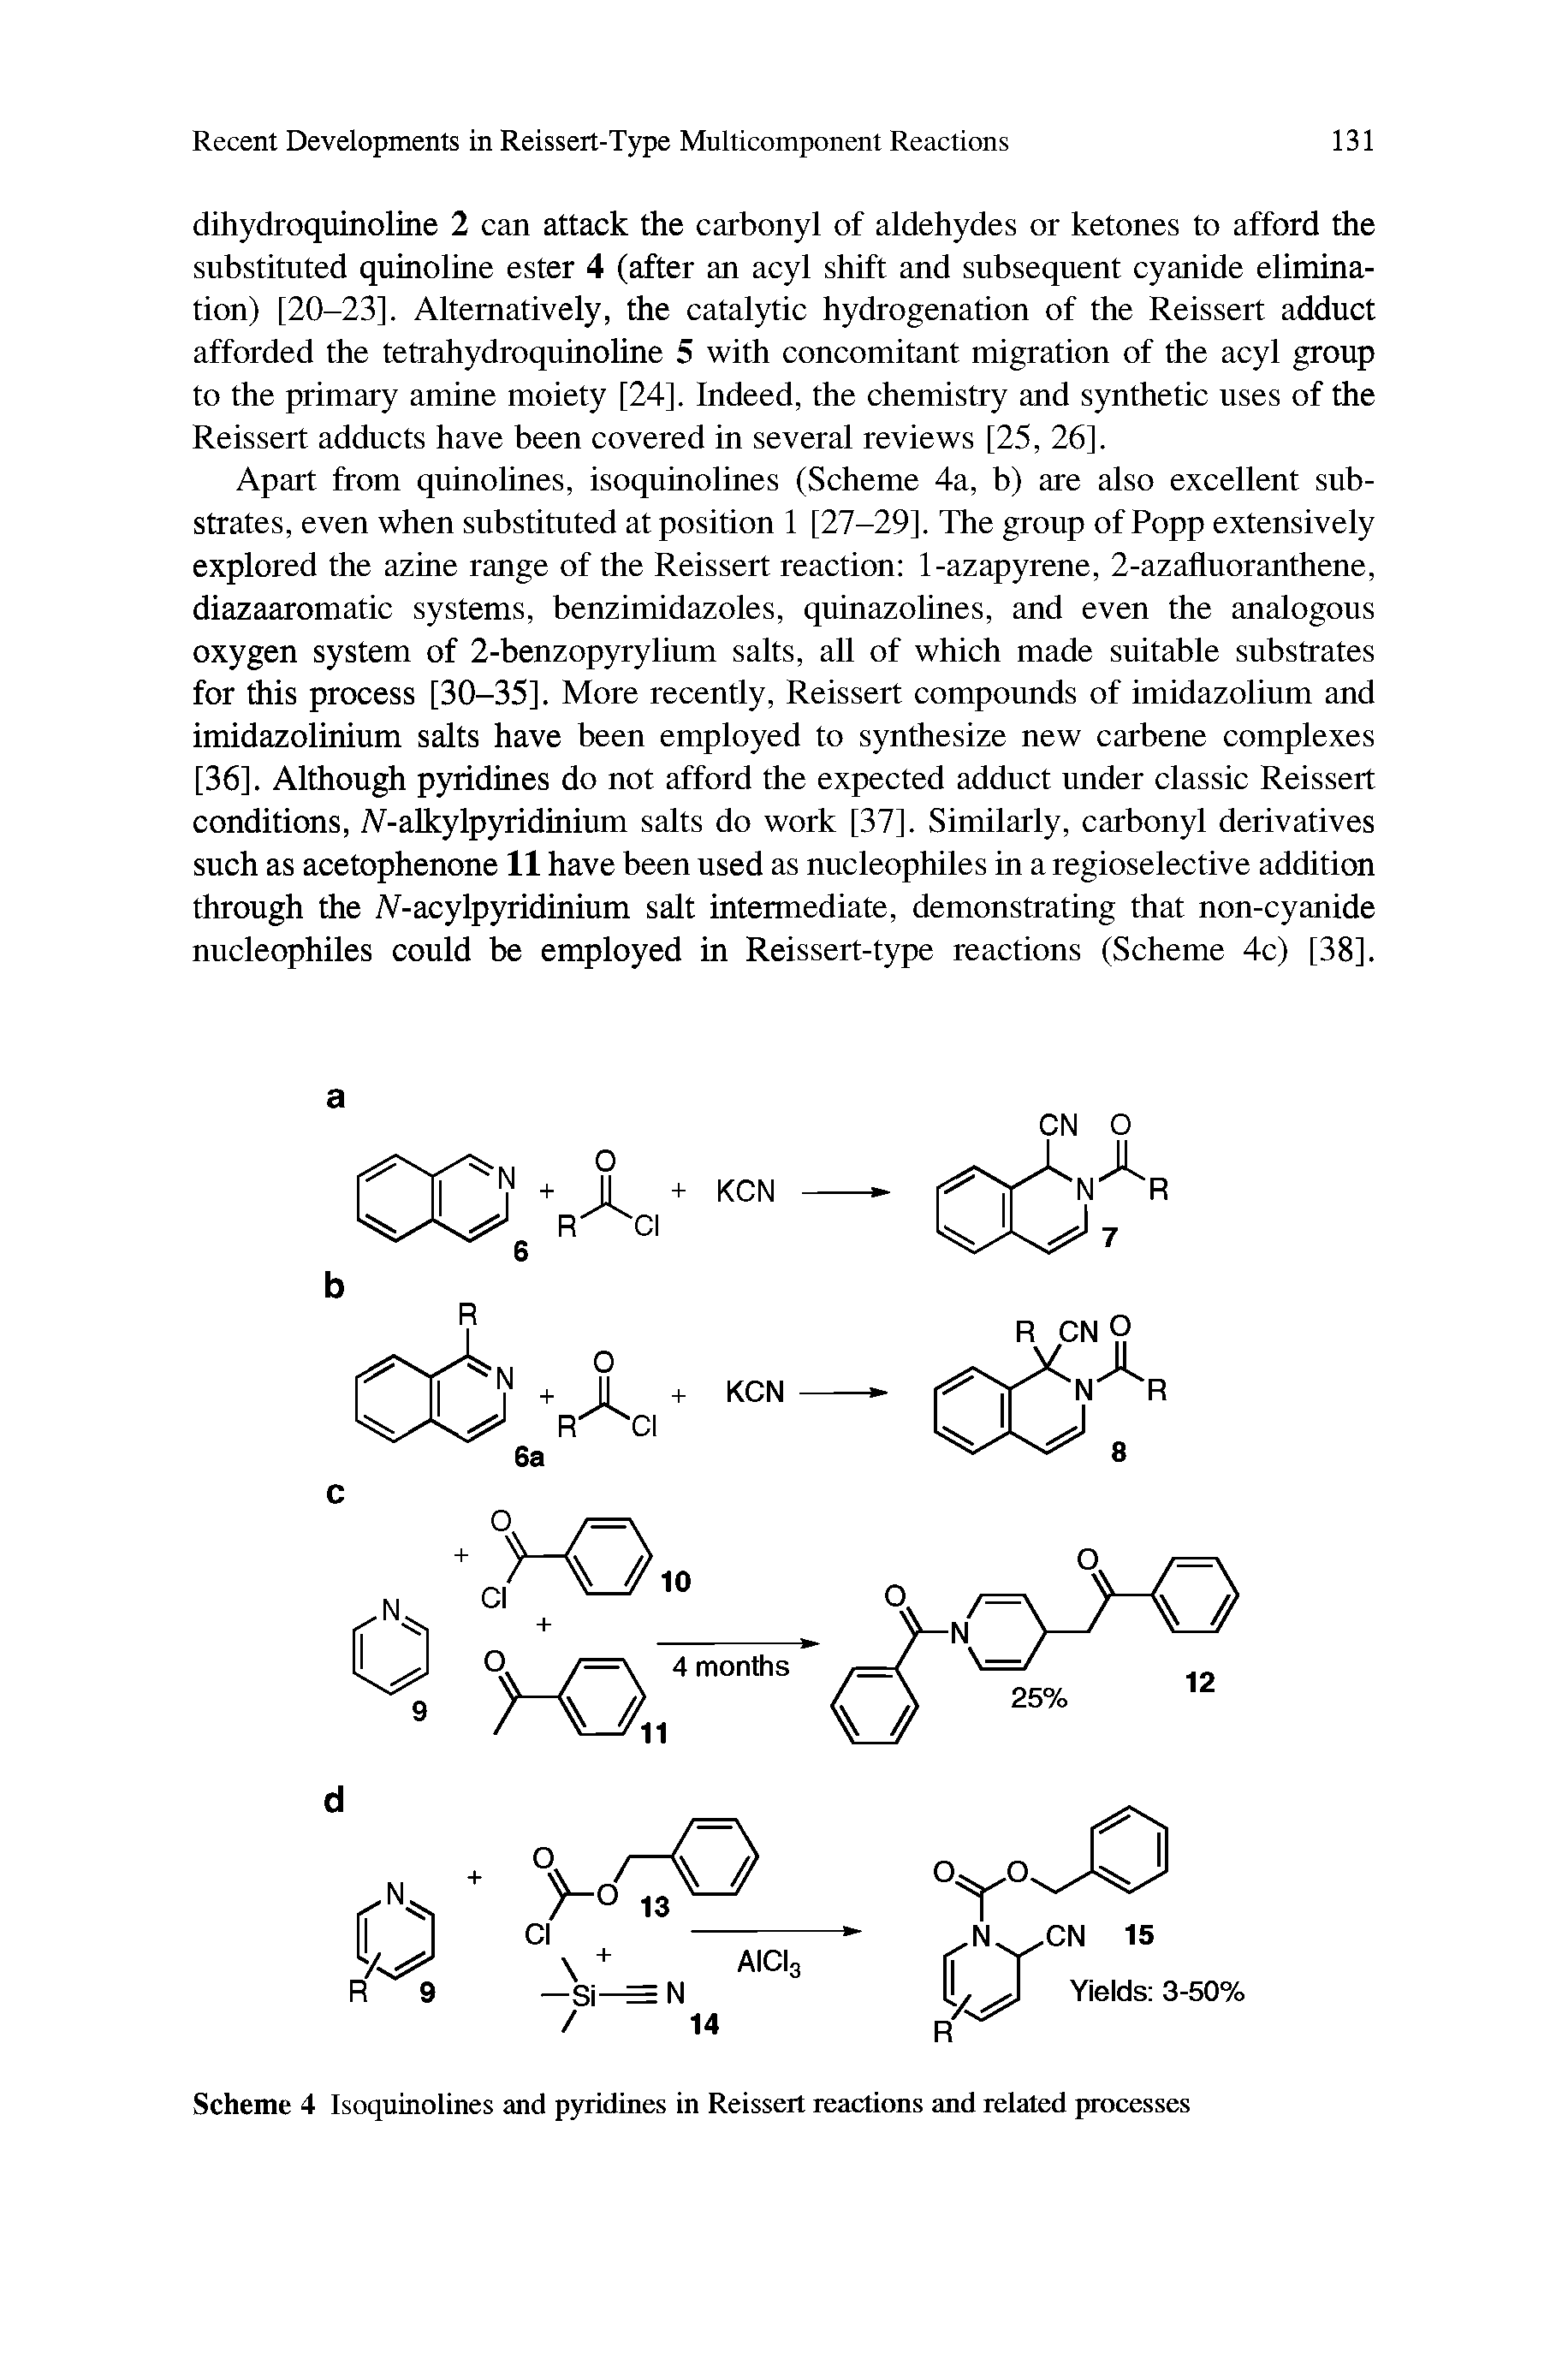 Scheme 4 Isoquinolines and pyridines in Reissert reactions and related processes...